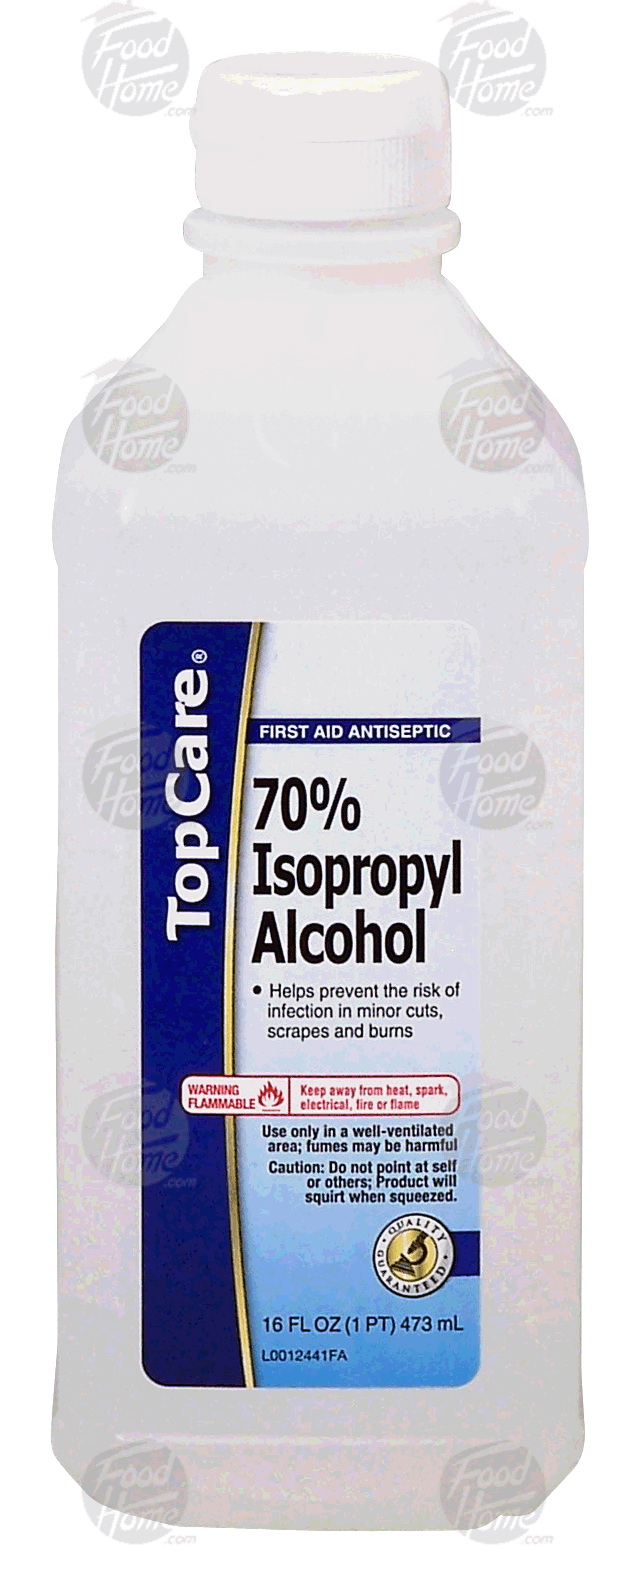 Top Care  isopropyl alcohol, 70 percent solution, first aid antiseptic Full-Size Picture